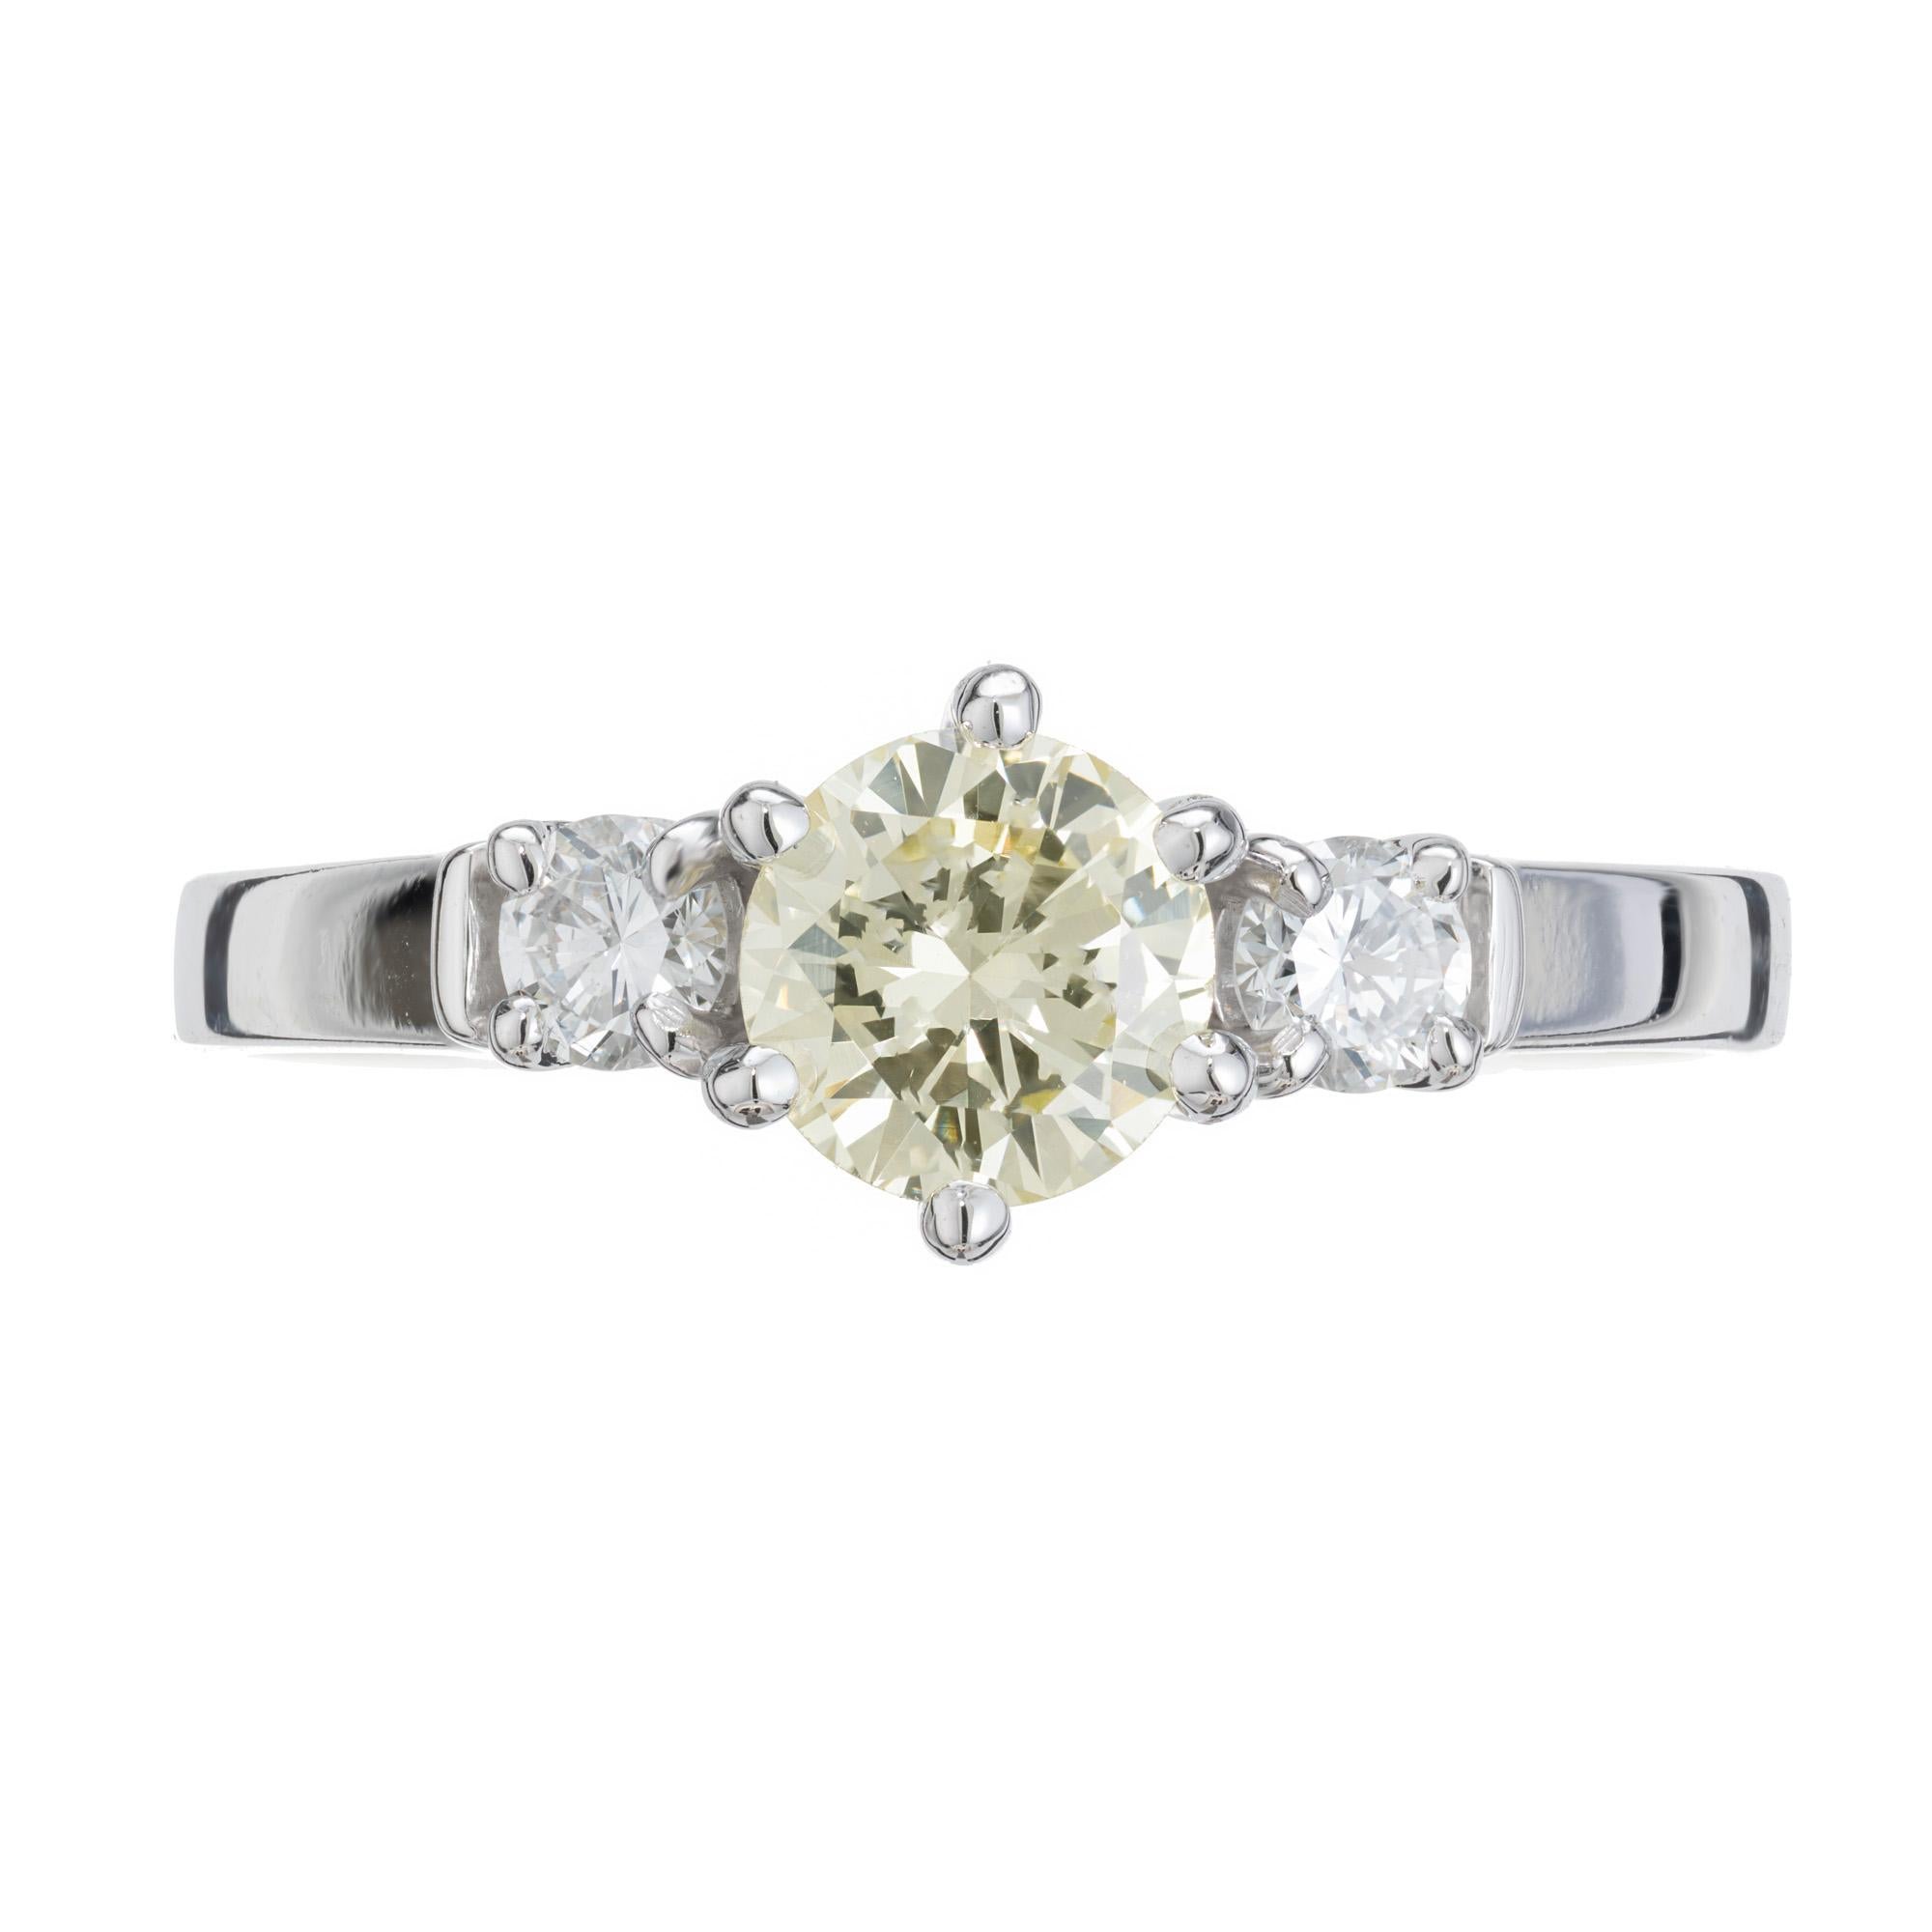 English Estate 1960'S fancy light yellow diamond engagement ring. .56cts round diamond center stone, set in a handmade 1960's handmade 18k white gold three-stone setting. Accented with 2 round cut side diamonds intended to accent the beautiful